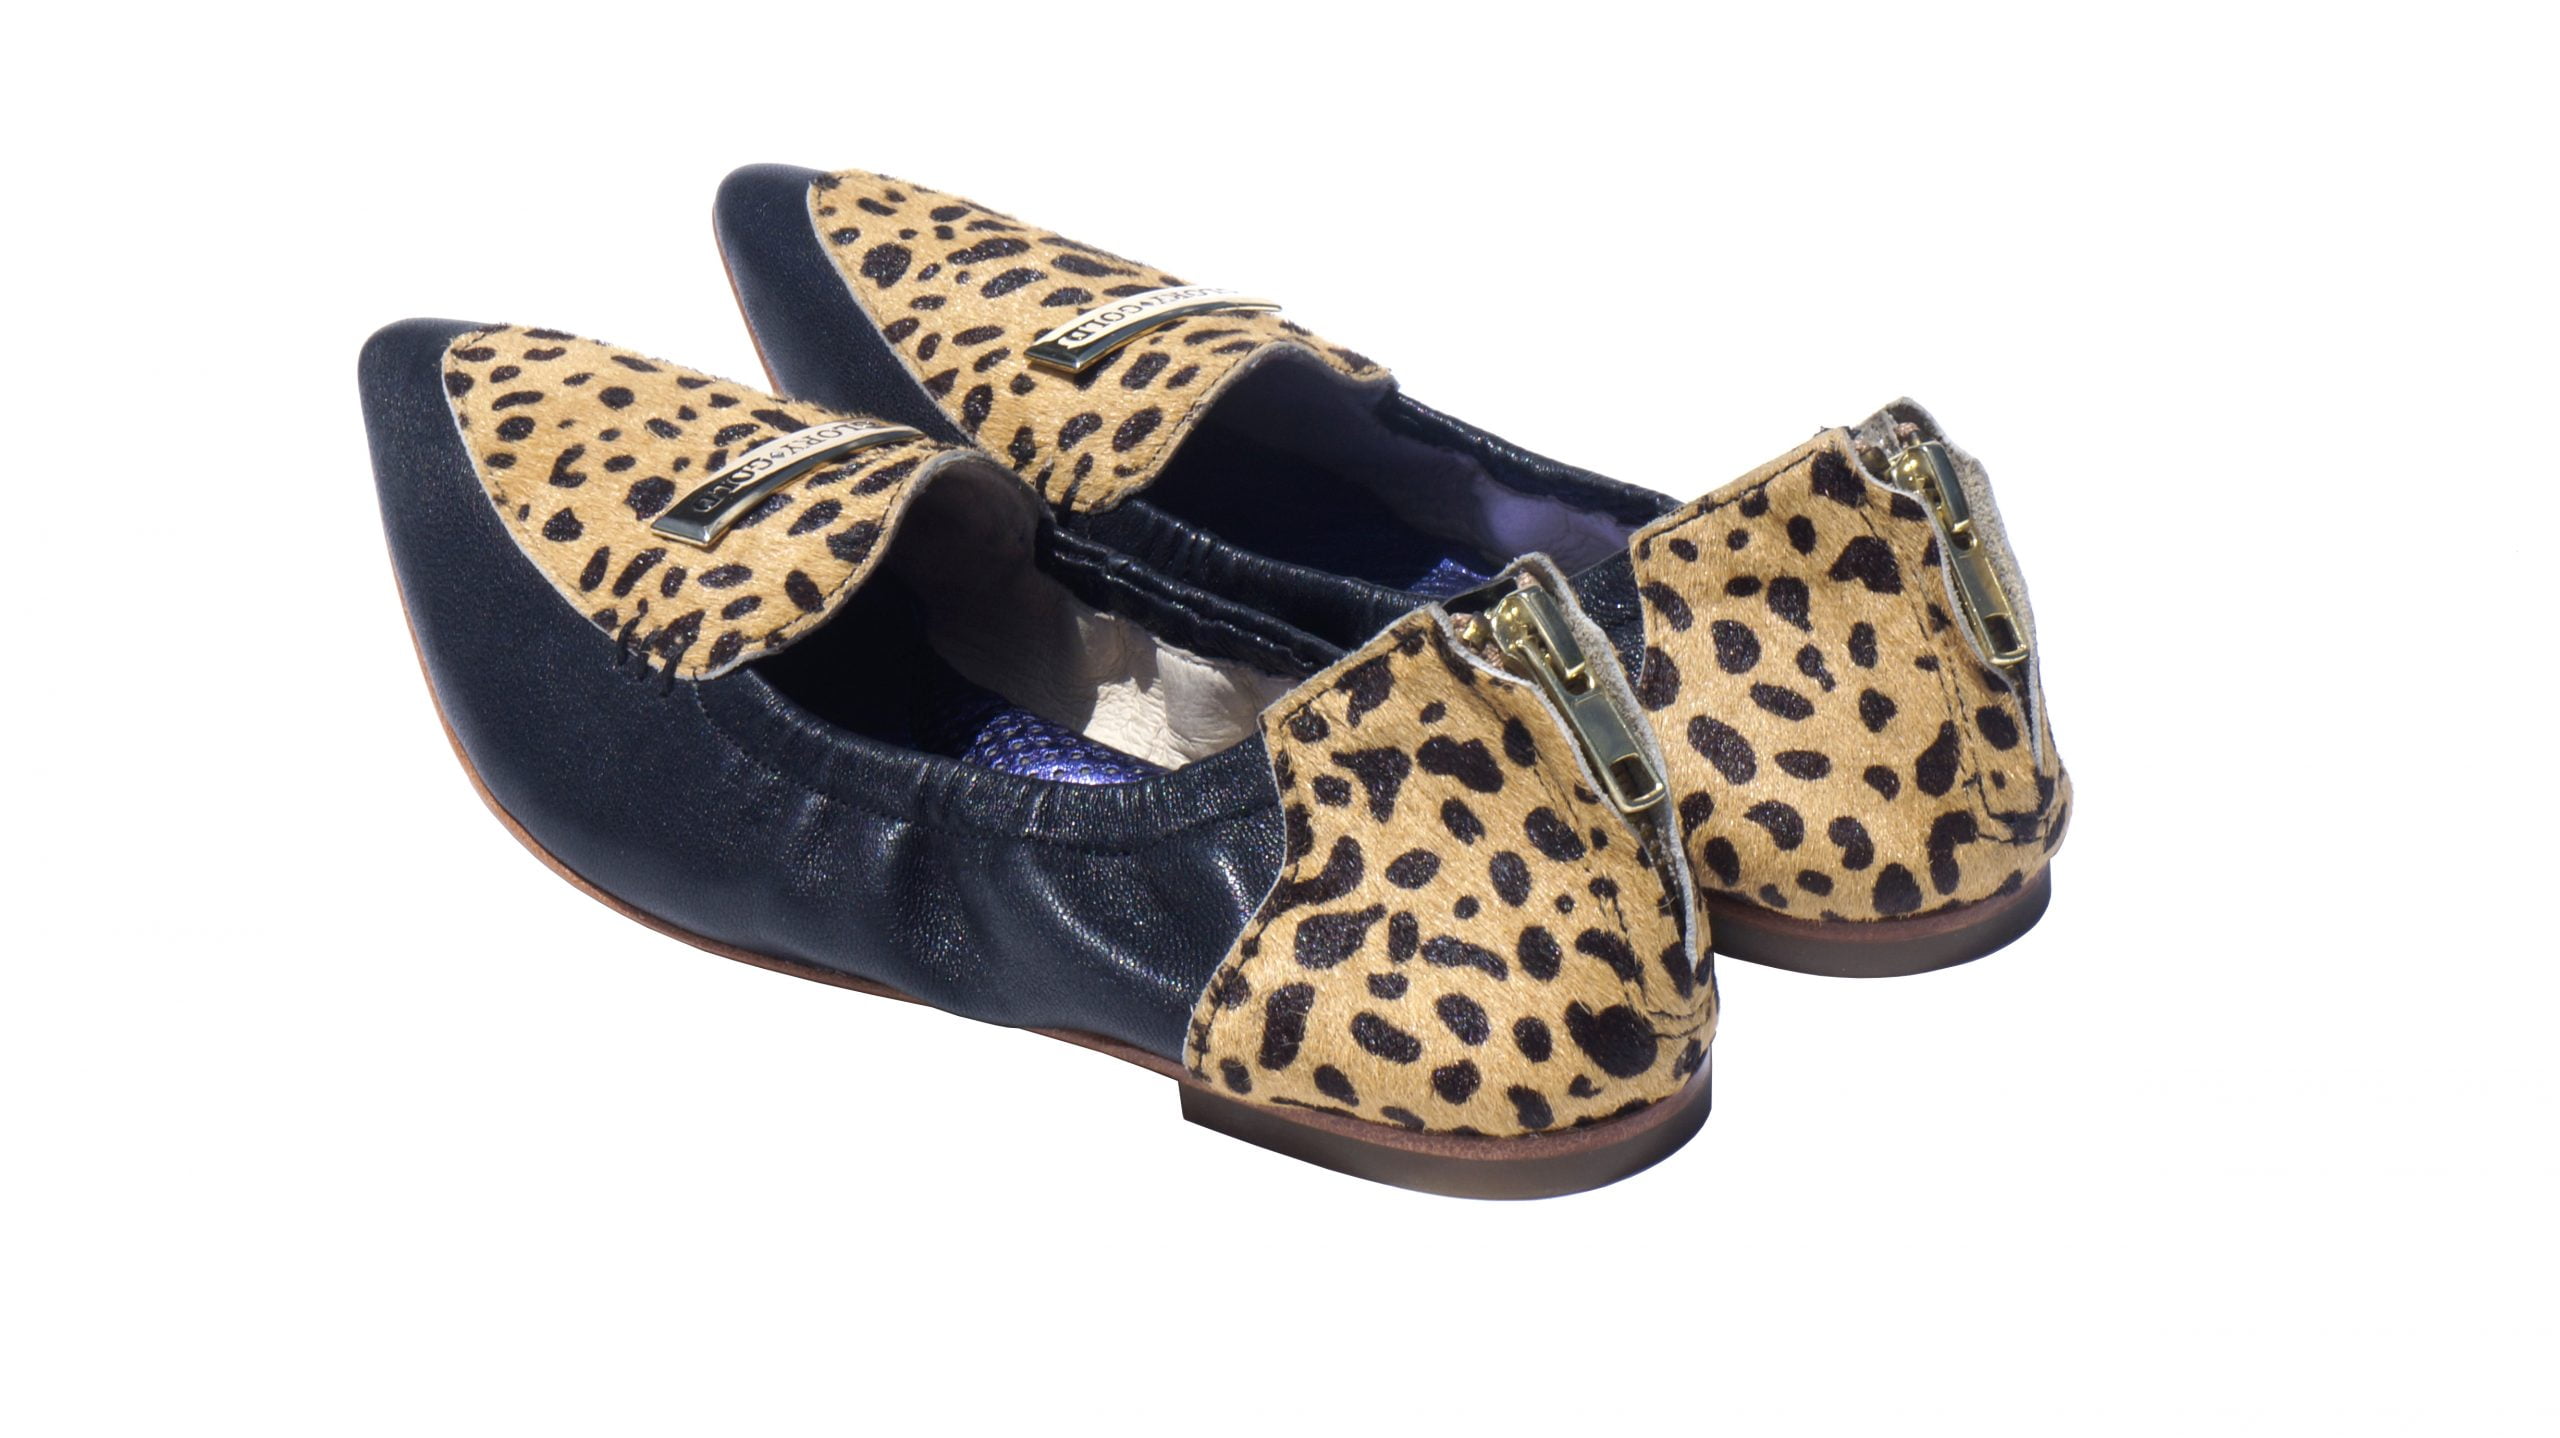 Black nappa leather and cheetah pony hair, round toe loafer flat, with Glory Gold Logo emblem